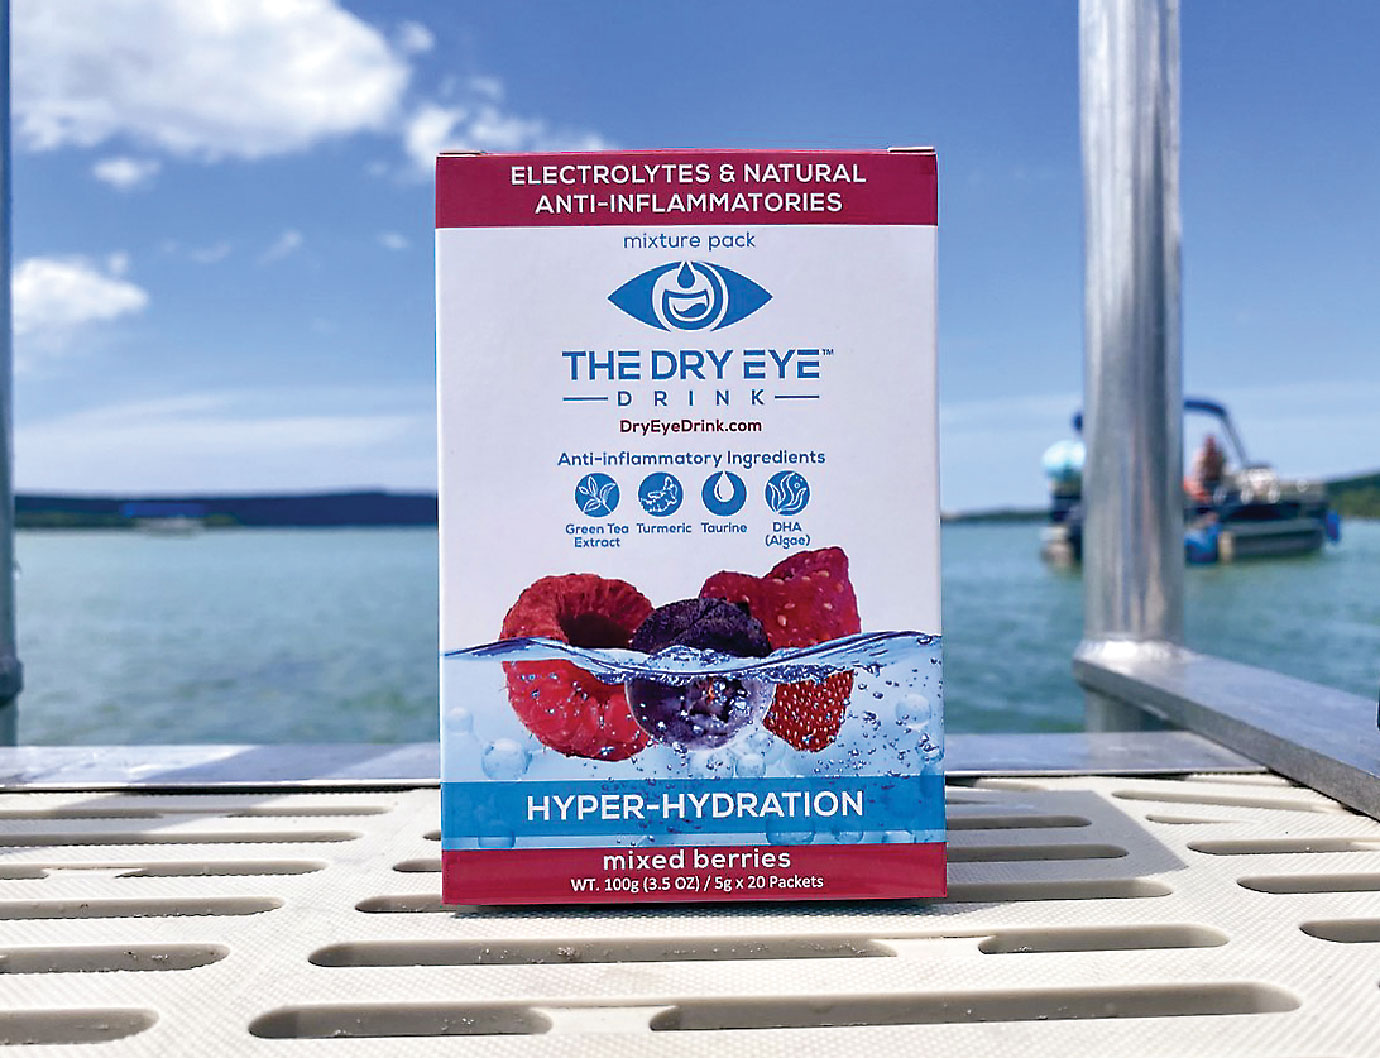 Dry Eye Drink is a combination of turmeric, DHA, taurine, green tea and natural electrolytes, which helps decrease inflammation.